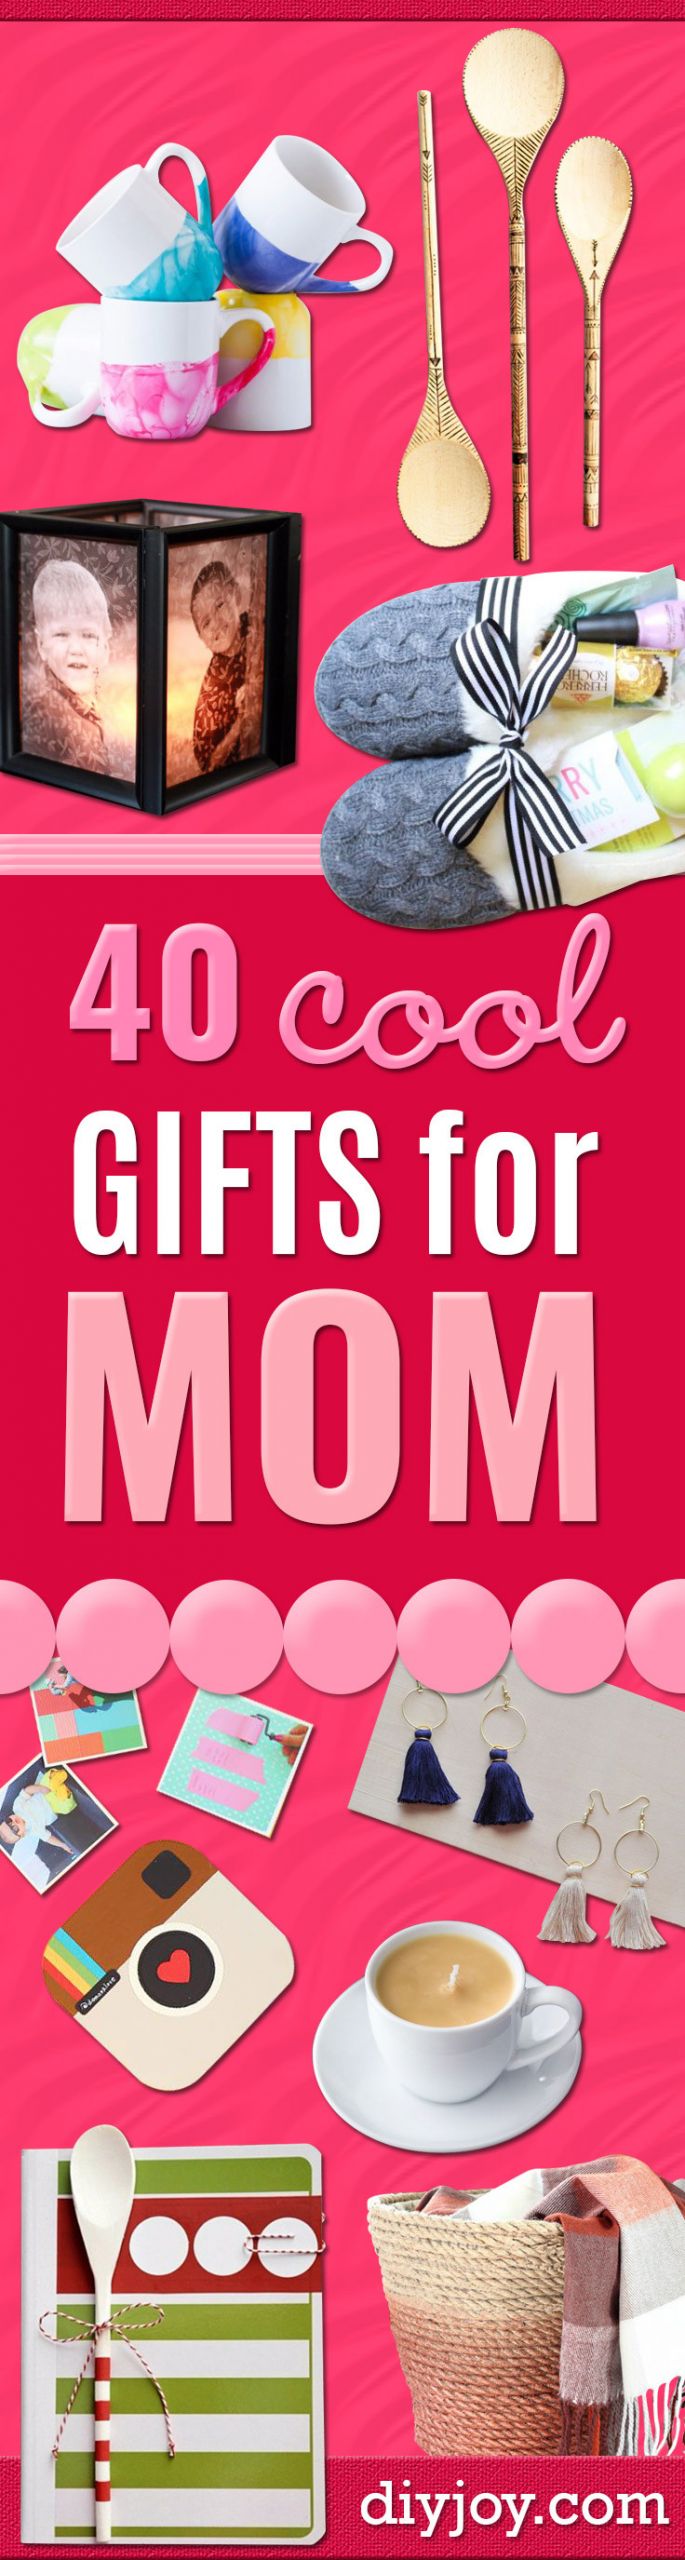 Birthday Gifts For Mom Diy
 40 Coolest Gifts To Make for Mom